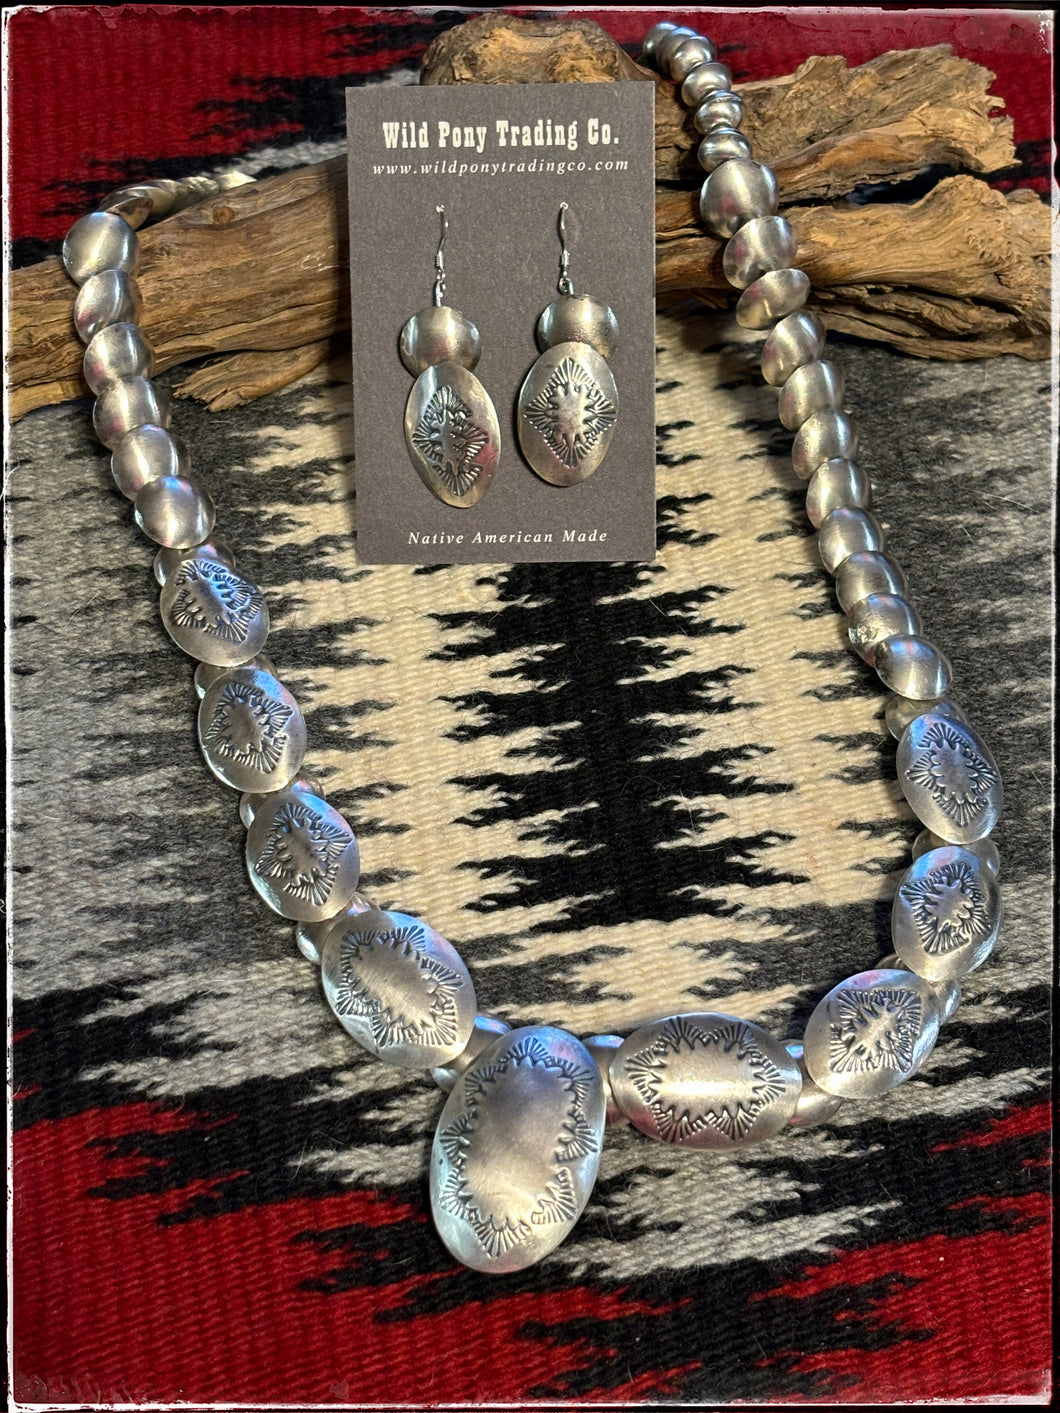 Lawrence Begay, handmade pillow bead set of Necklace and earrings.